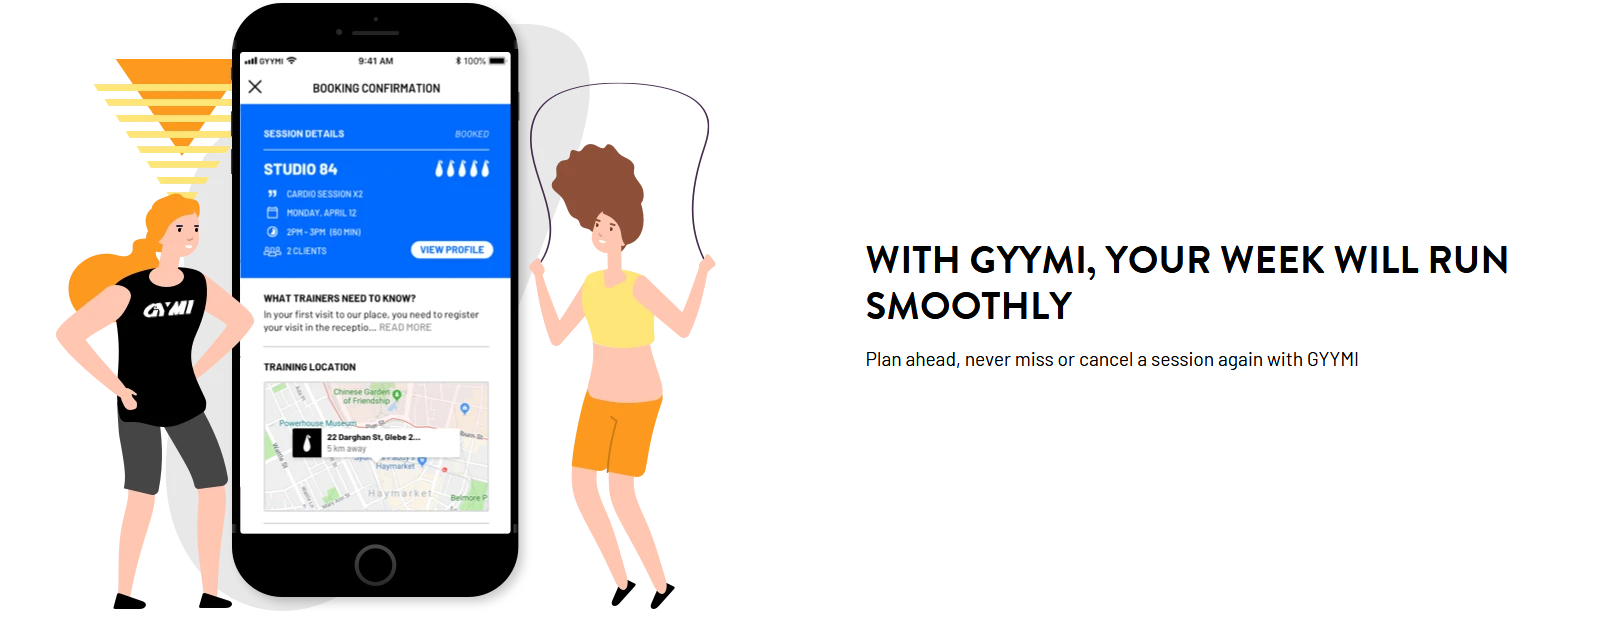 Find pricing, reviews and other details about GYYMI